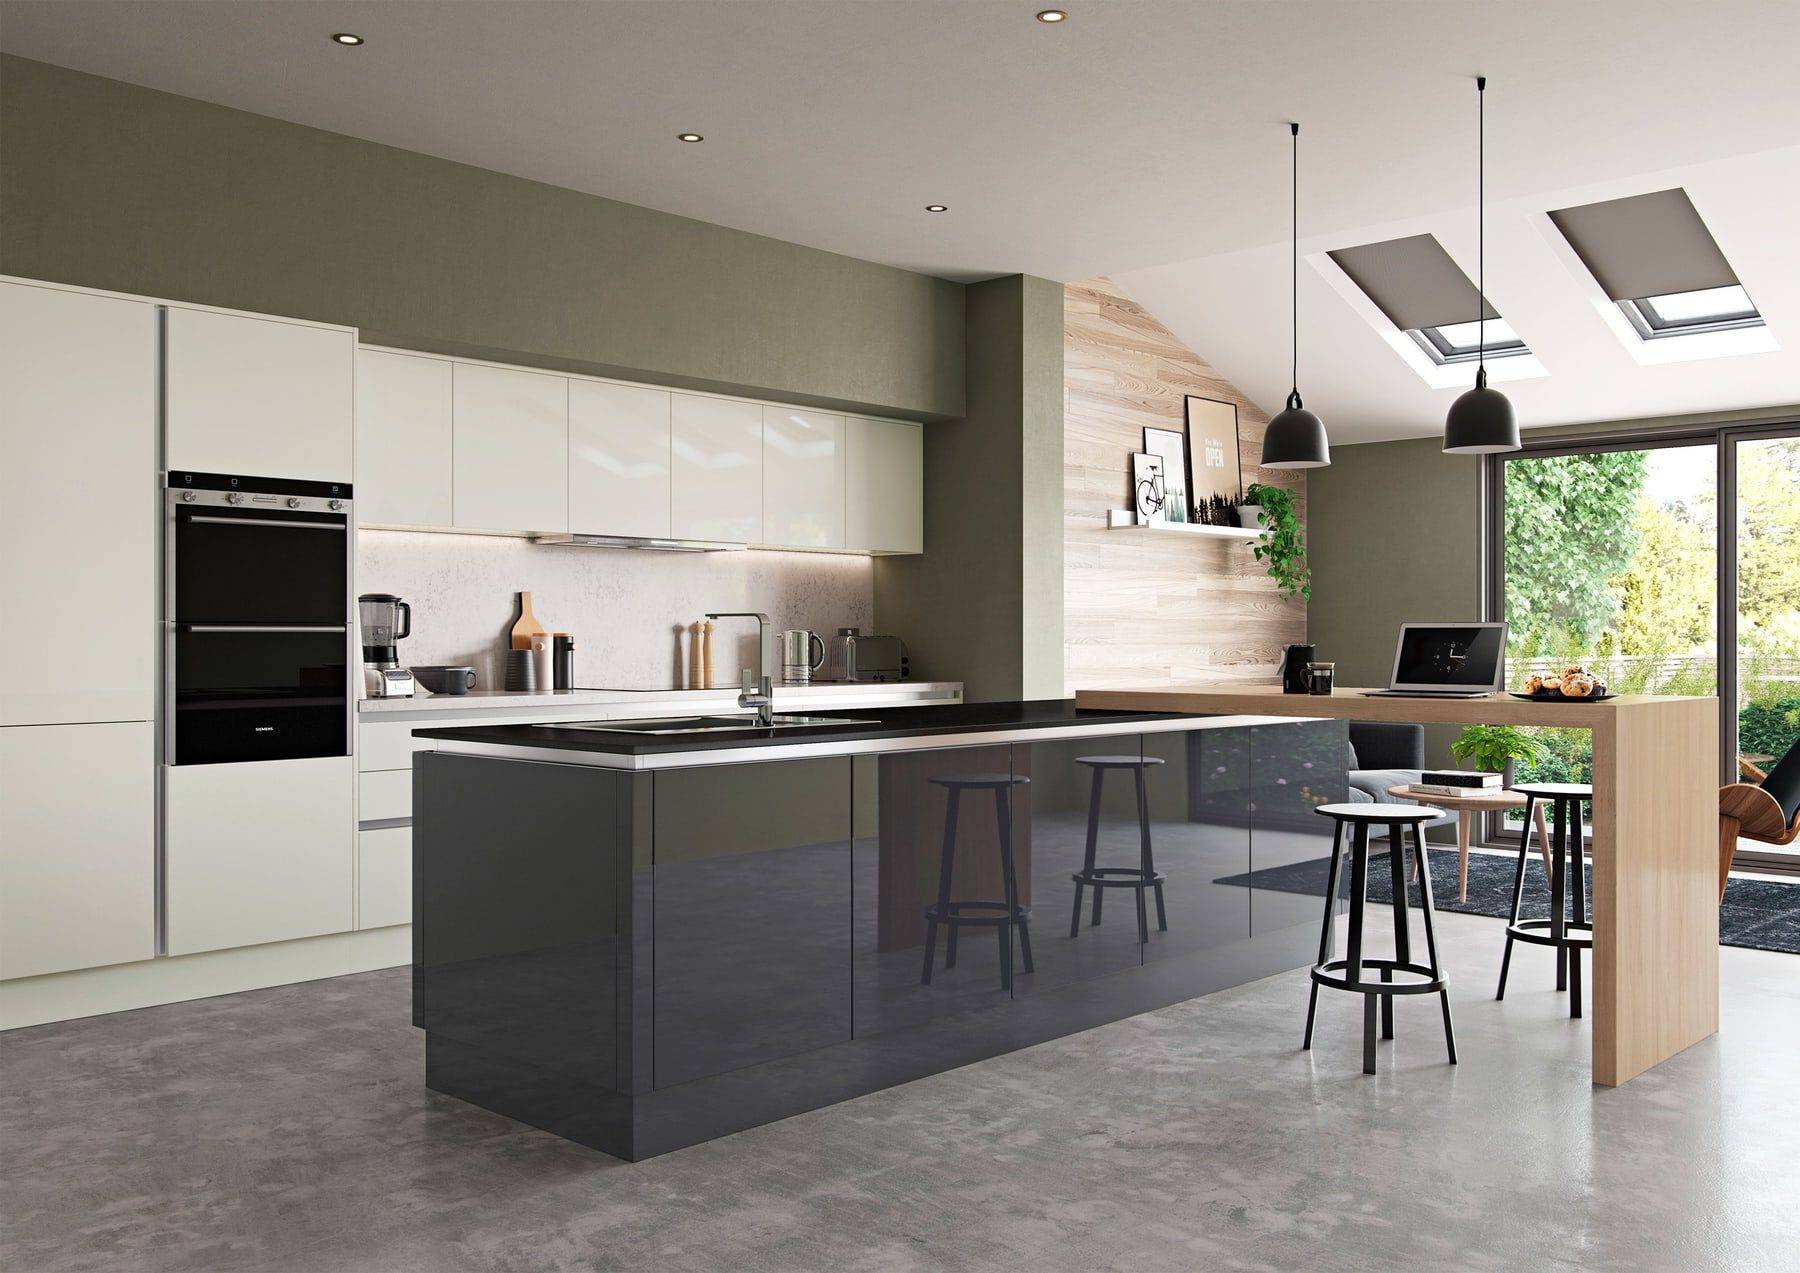 Zola Gloss Porcelain And Graphite Handleless Open Plan Kitchen | Colourhill, Lincoln